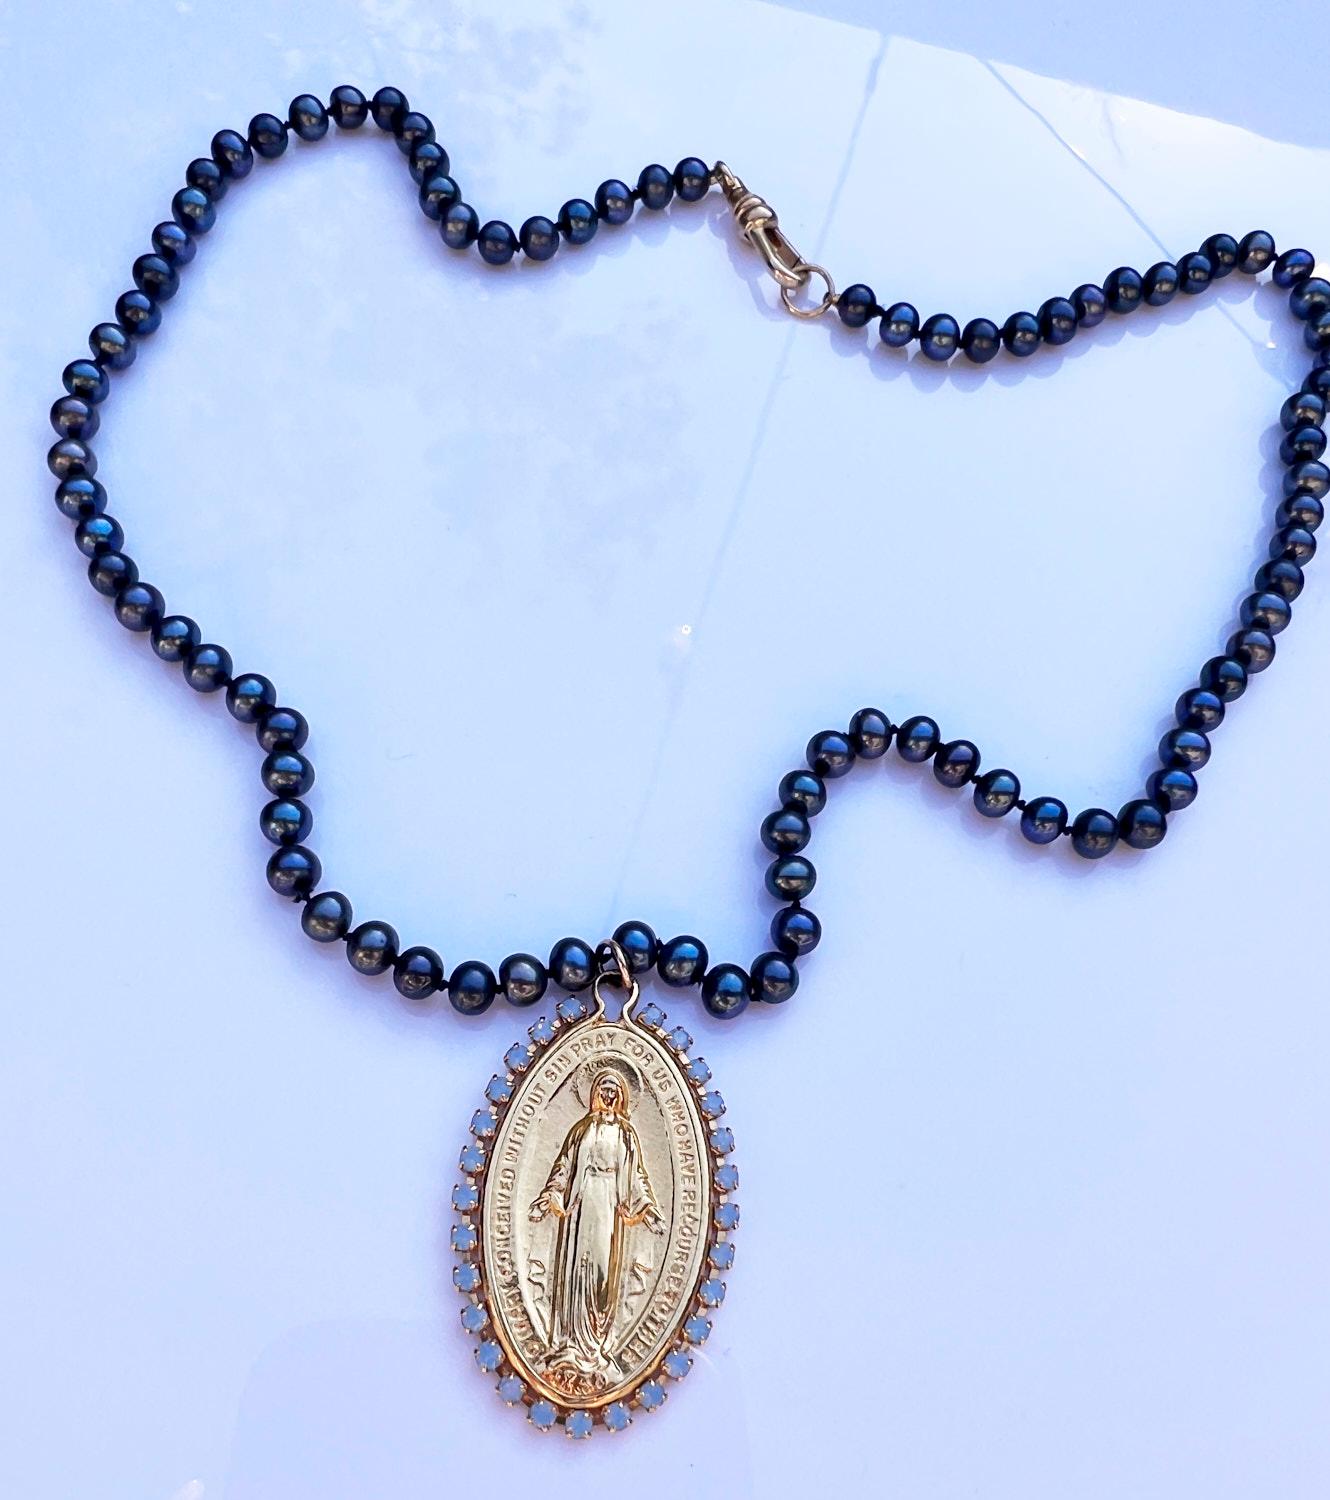 Victorian Crystal Virgin Mary Medal Black Pearl Necklace Choker J Dauphin For Sale